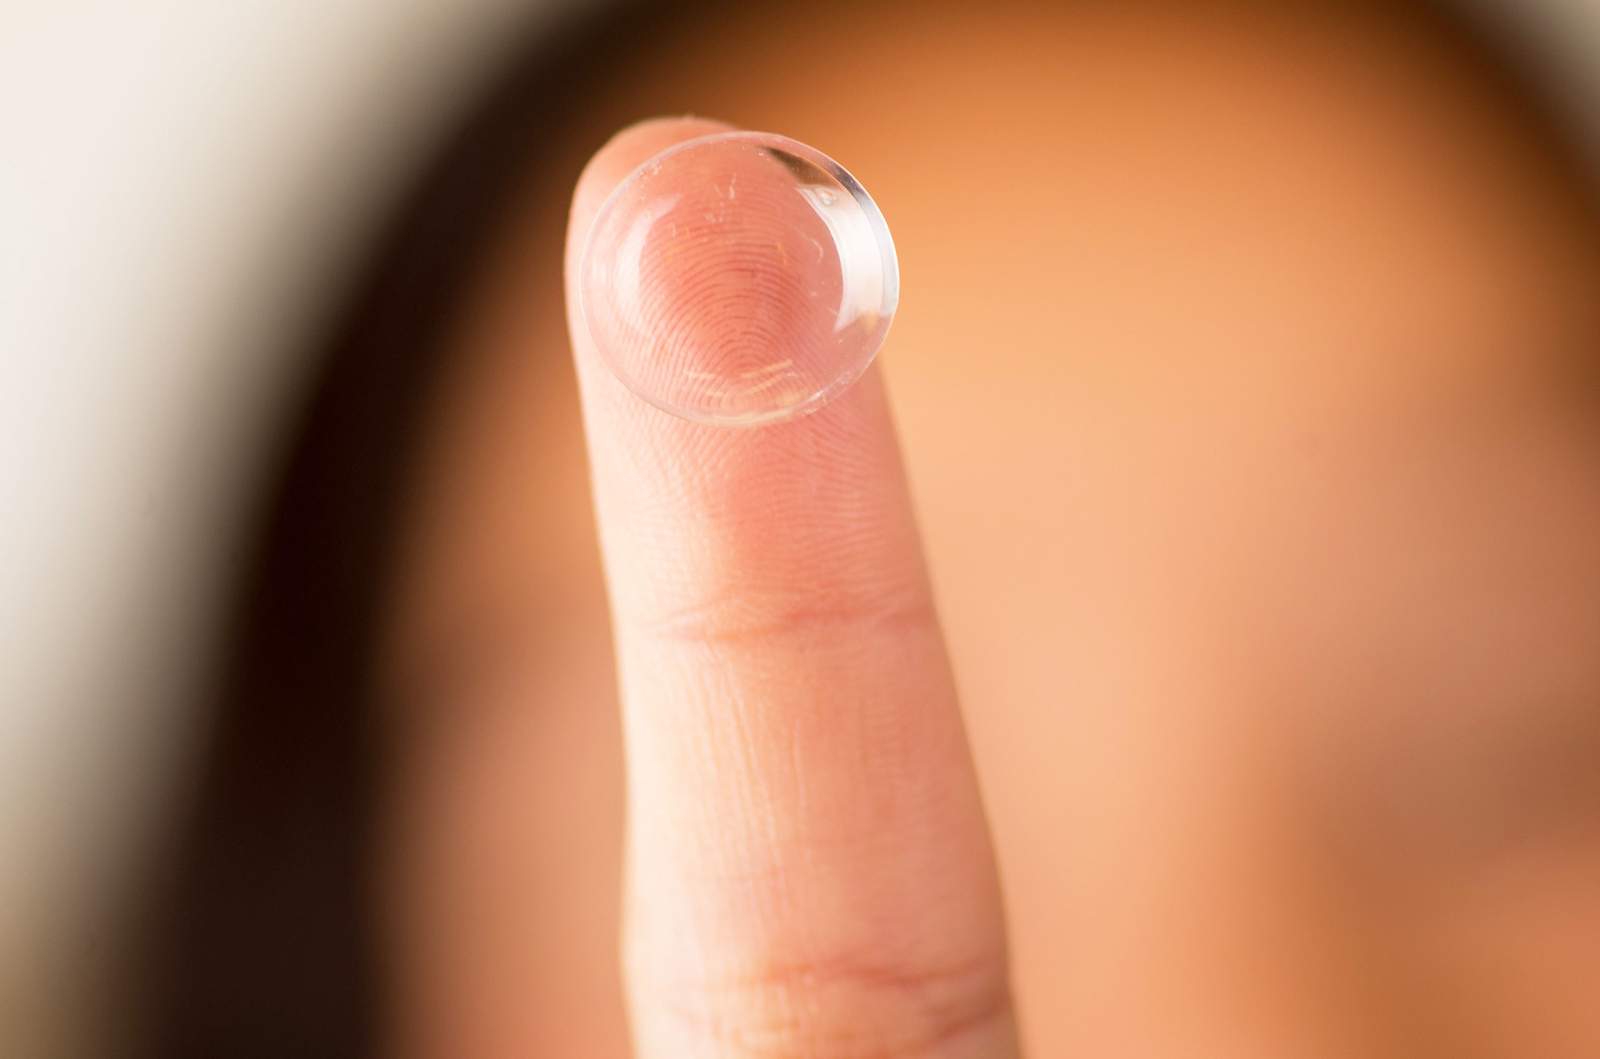 Do you wear contact lenses? You should switch to glasses to stop spreading the virus